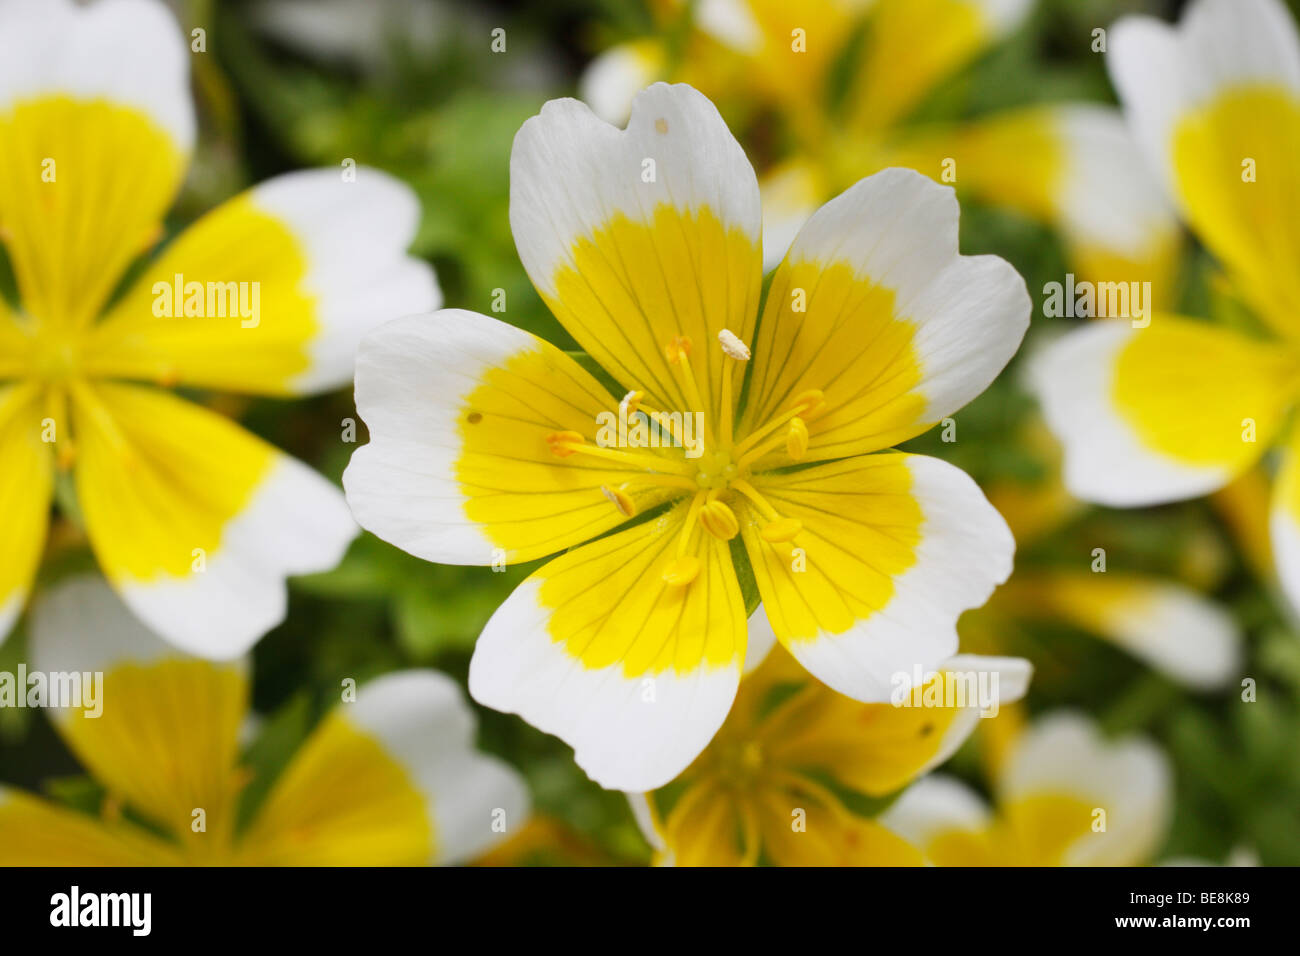 Close up of the poached egg plant (Limnanthes douglasii) flower. Stock Photo